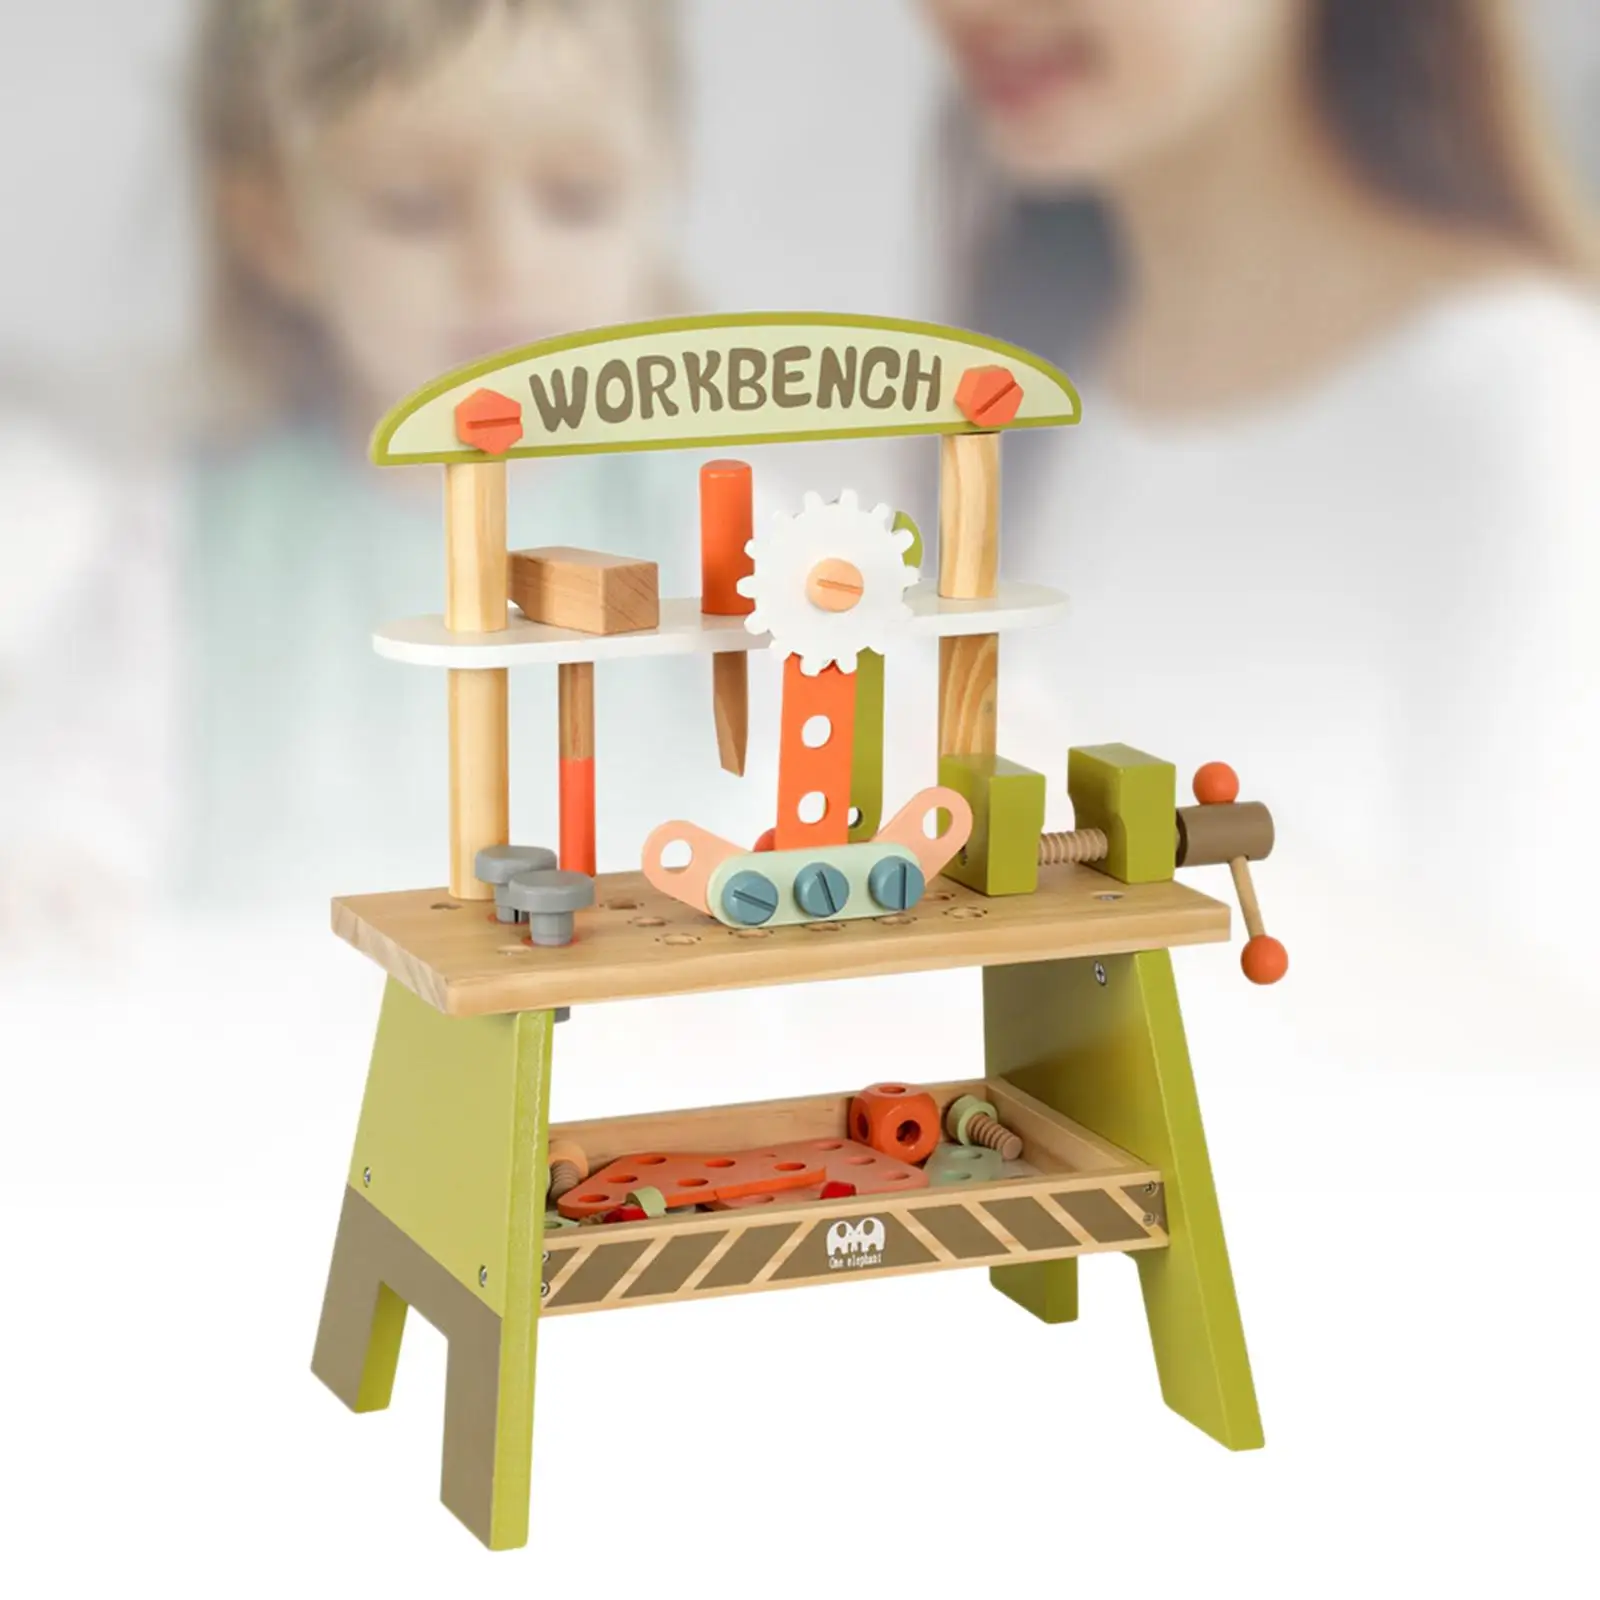 Pretend Play Construction Toy DIY Small Wooden Kid Workbench Toy for 2 3 4 5 Years Old Holiday Presents Child Christmas Gifts